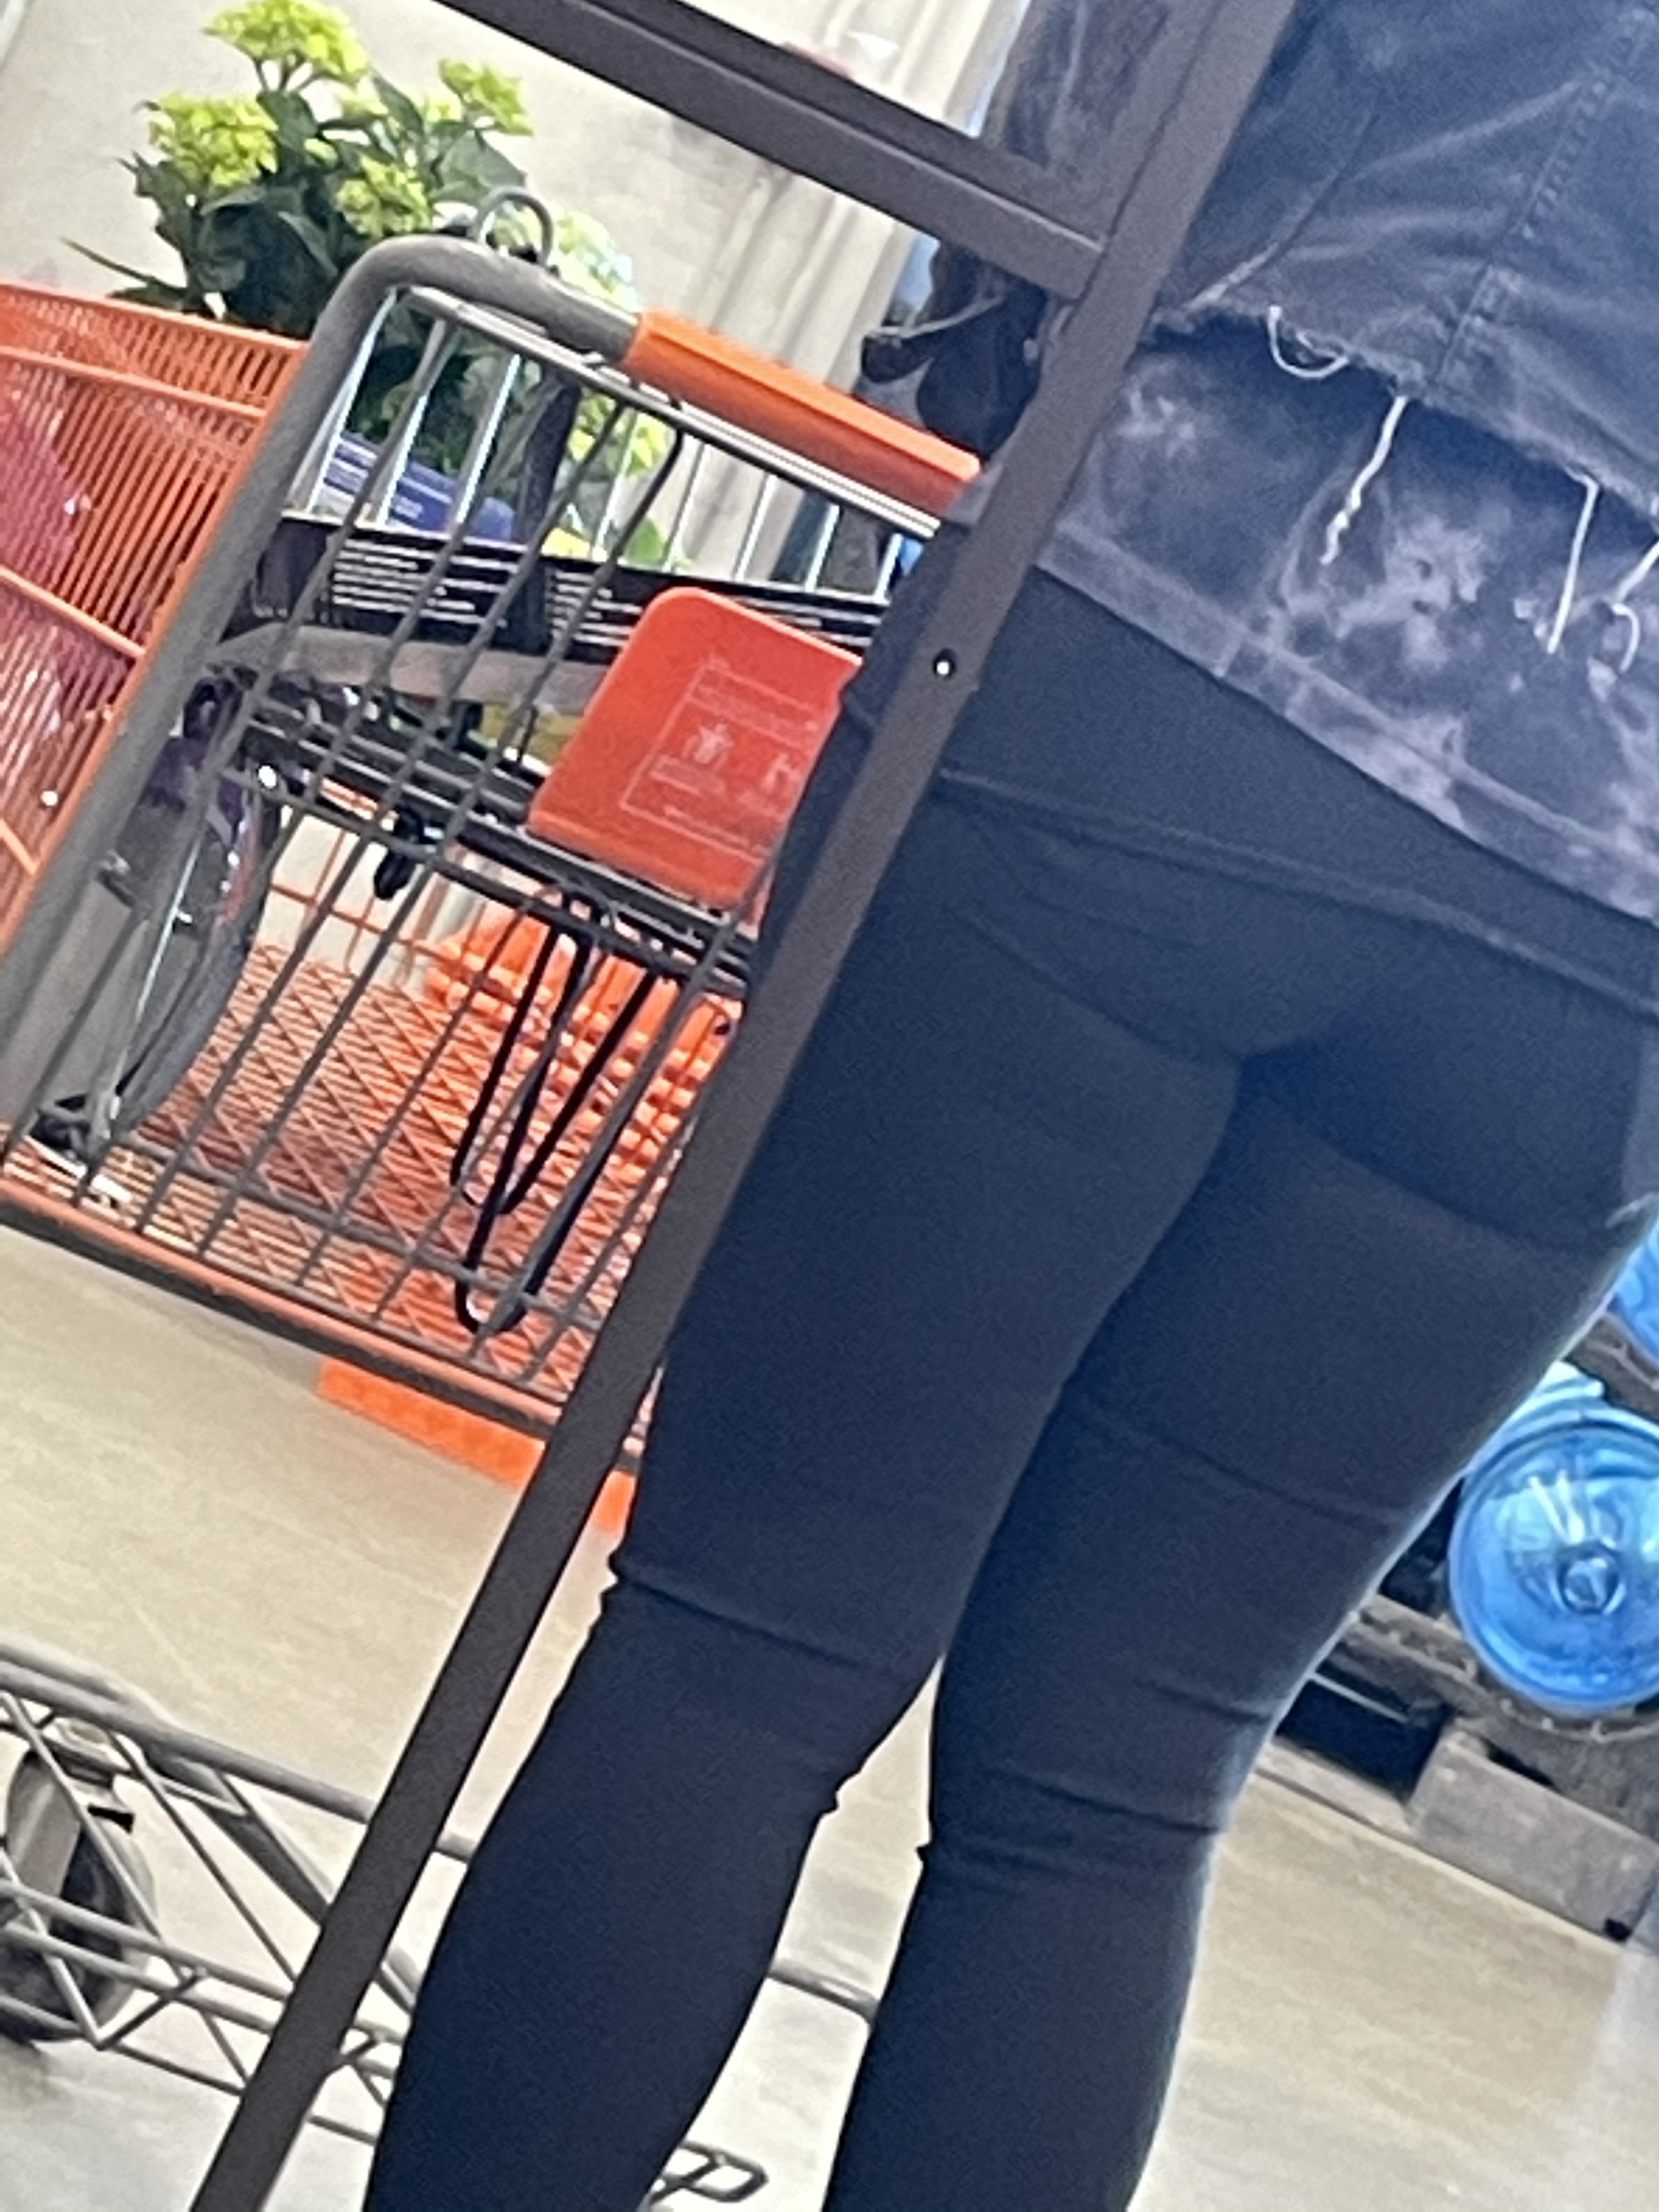 Petite ass check in out. - Spandex, Leggings & Yoga Pants - Forum